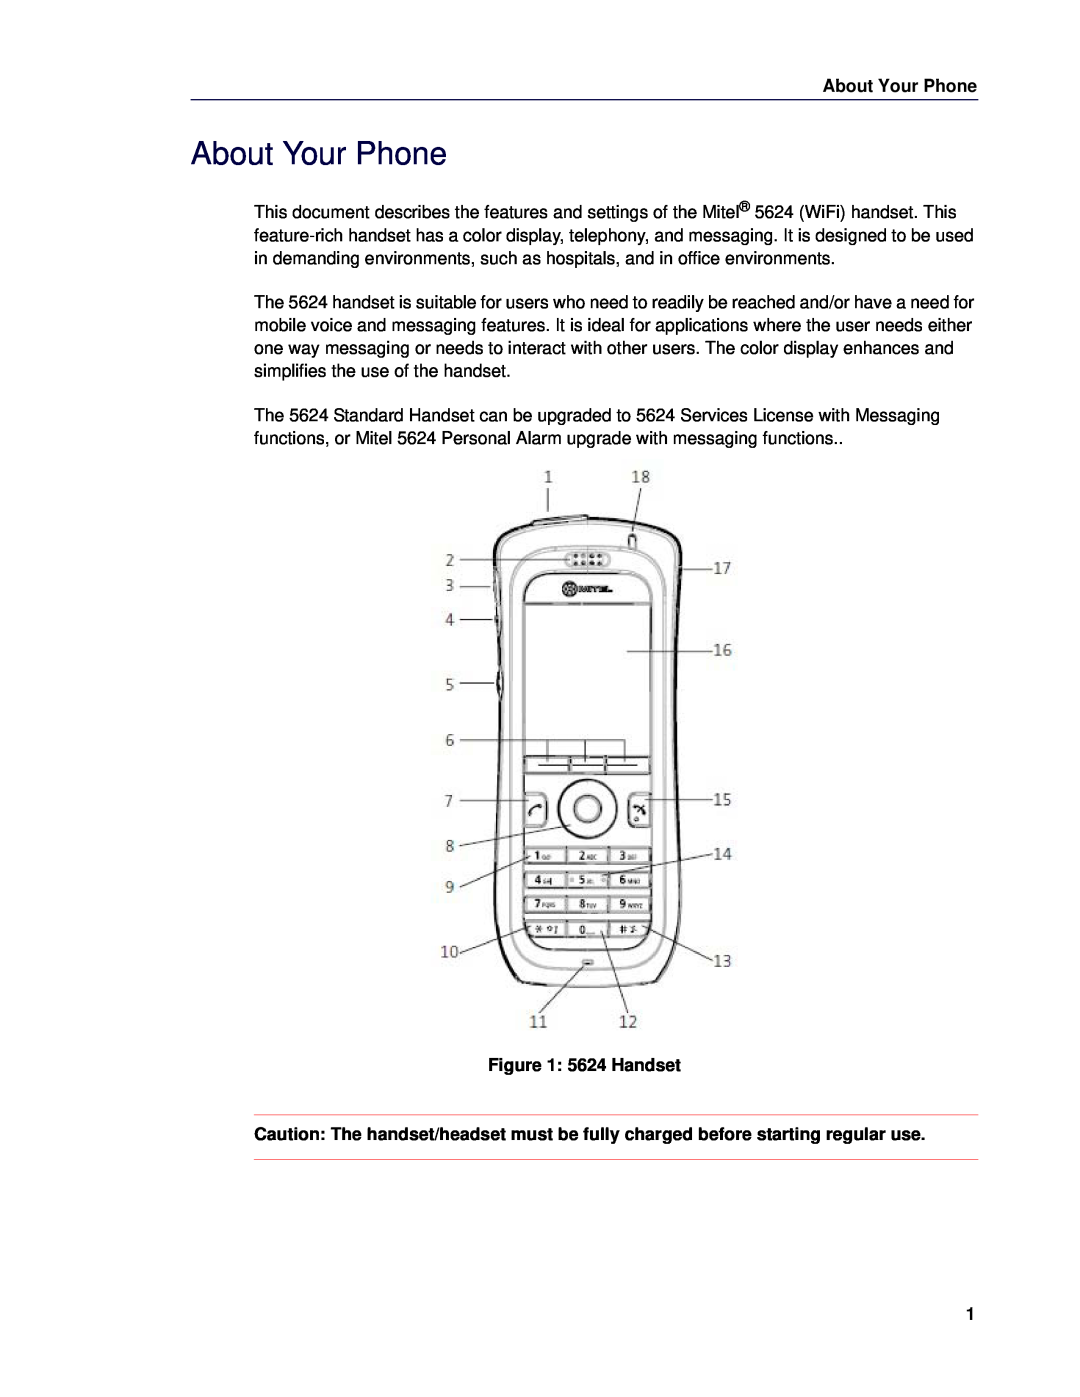 Mitel manual About Your Phone, 5624 Handset 